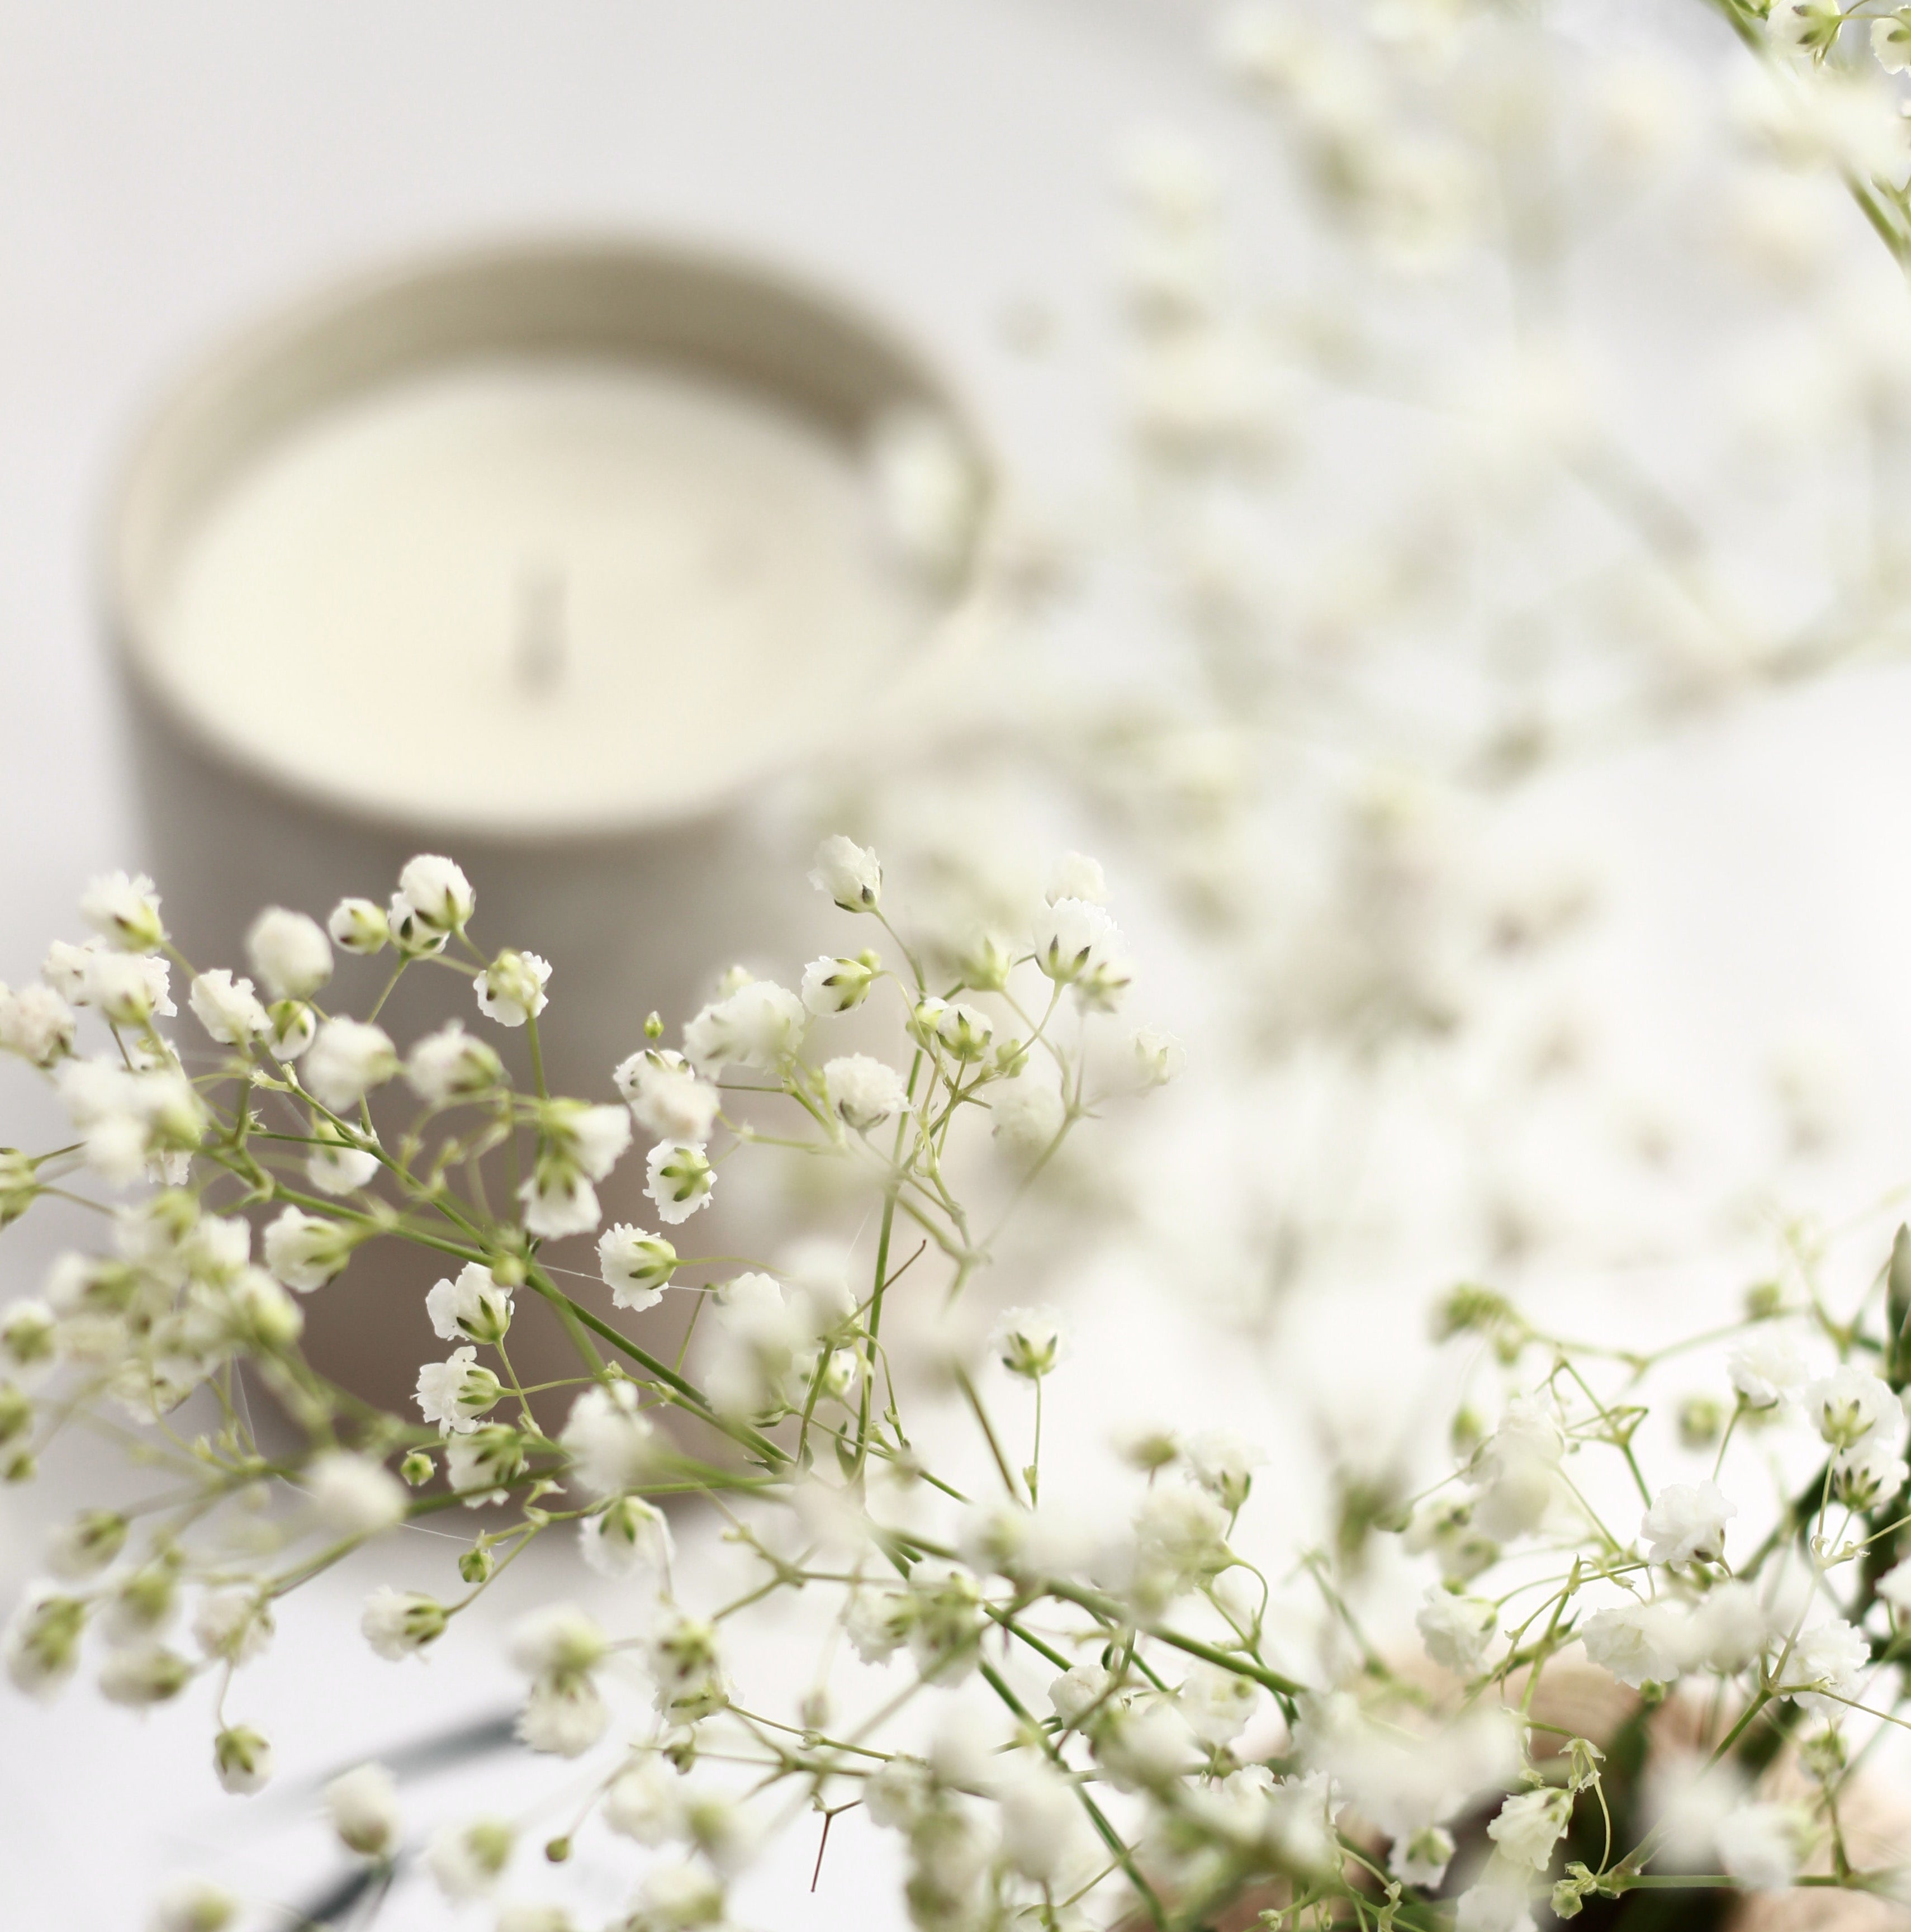 How can candles help your self-care practice?